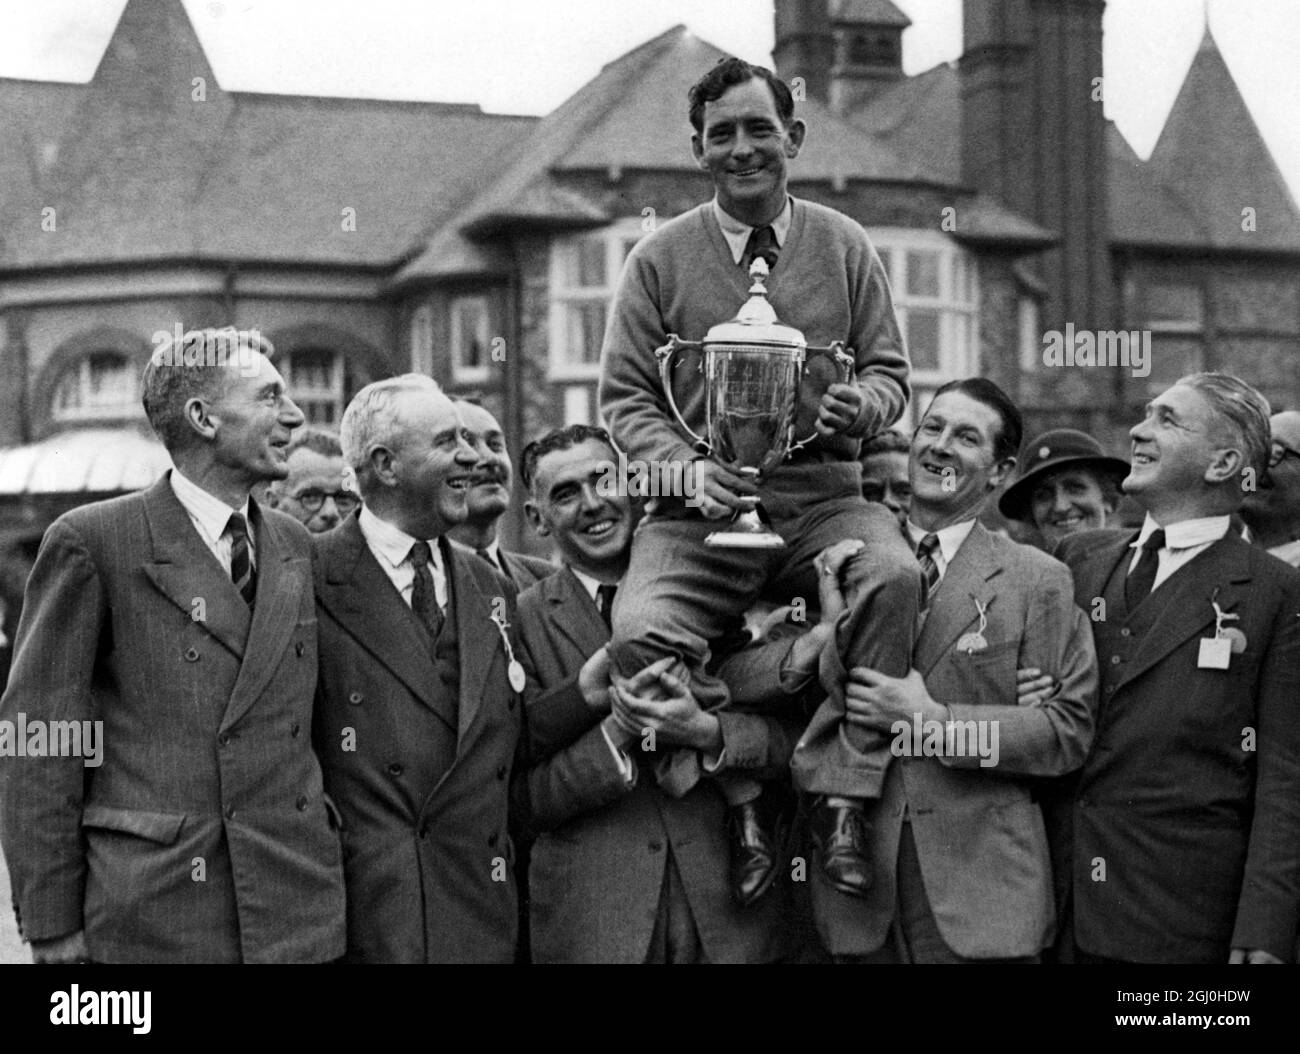 F. Daly is chaired by his Irish contingent of followers after his victory over F. Van Donck (Belgium) in the final of the News of the World Match Play Championship at the Royal Lytham and St. Anne's Course on Saturday. He is the first man to win both the Open and Match Play Championships in the same year. - 28th September 1947 - ©TopFoto Stock Photo